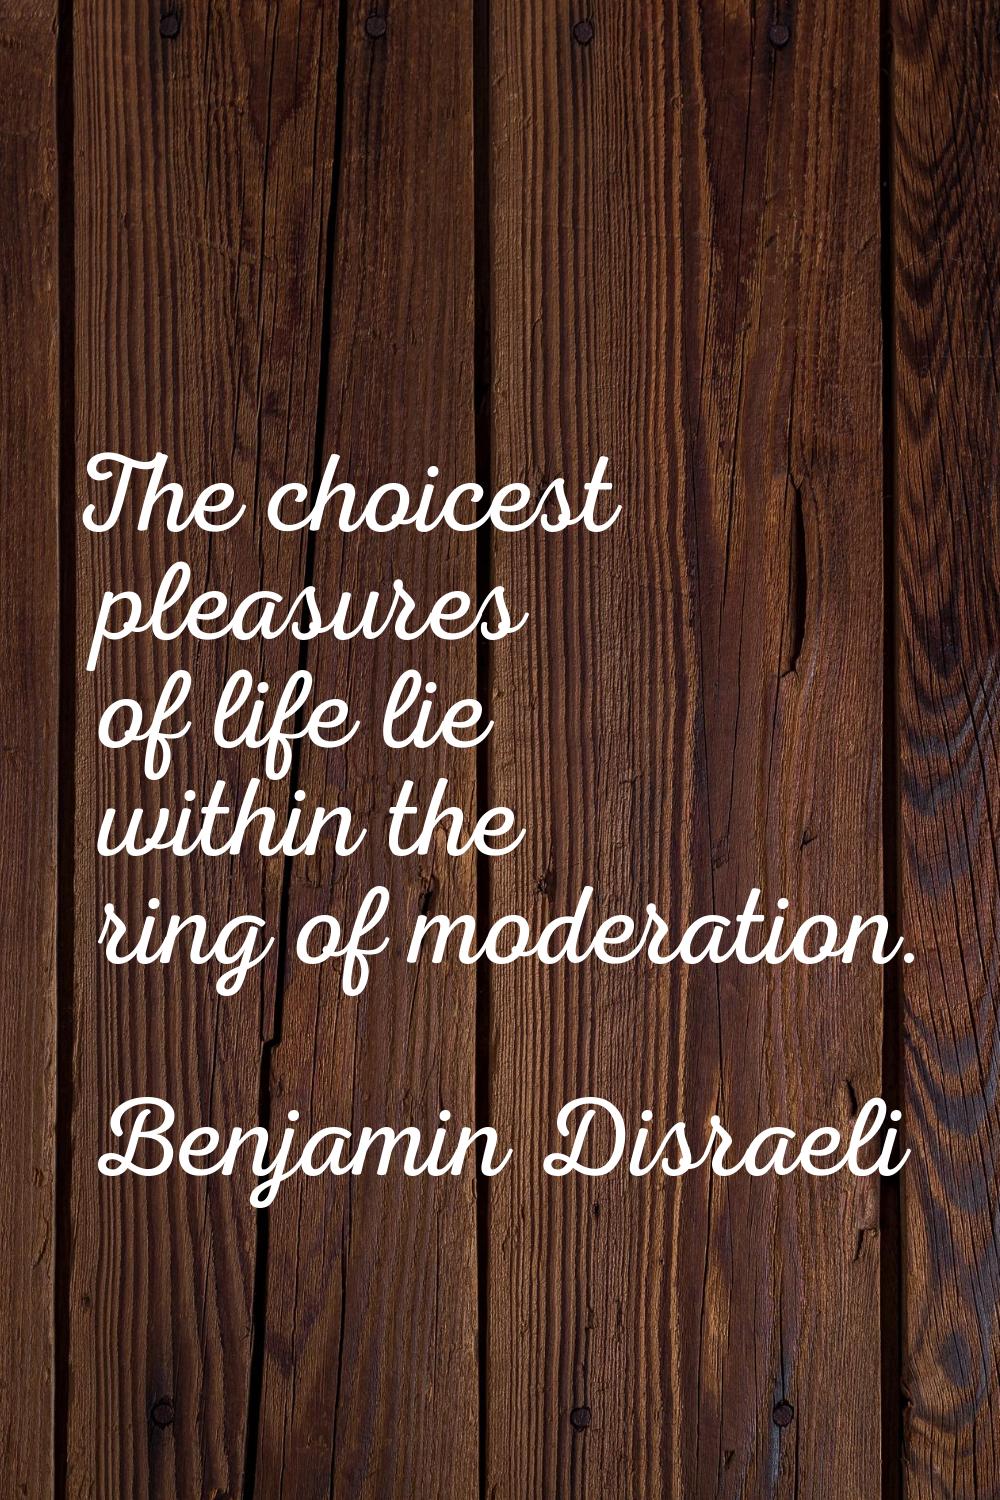 The choicest pleasures of life lie within the ring of moderation.